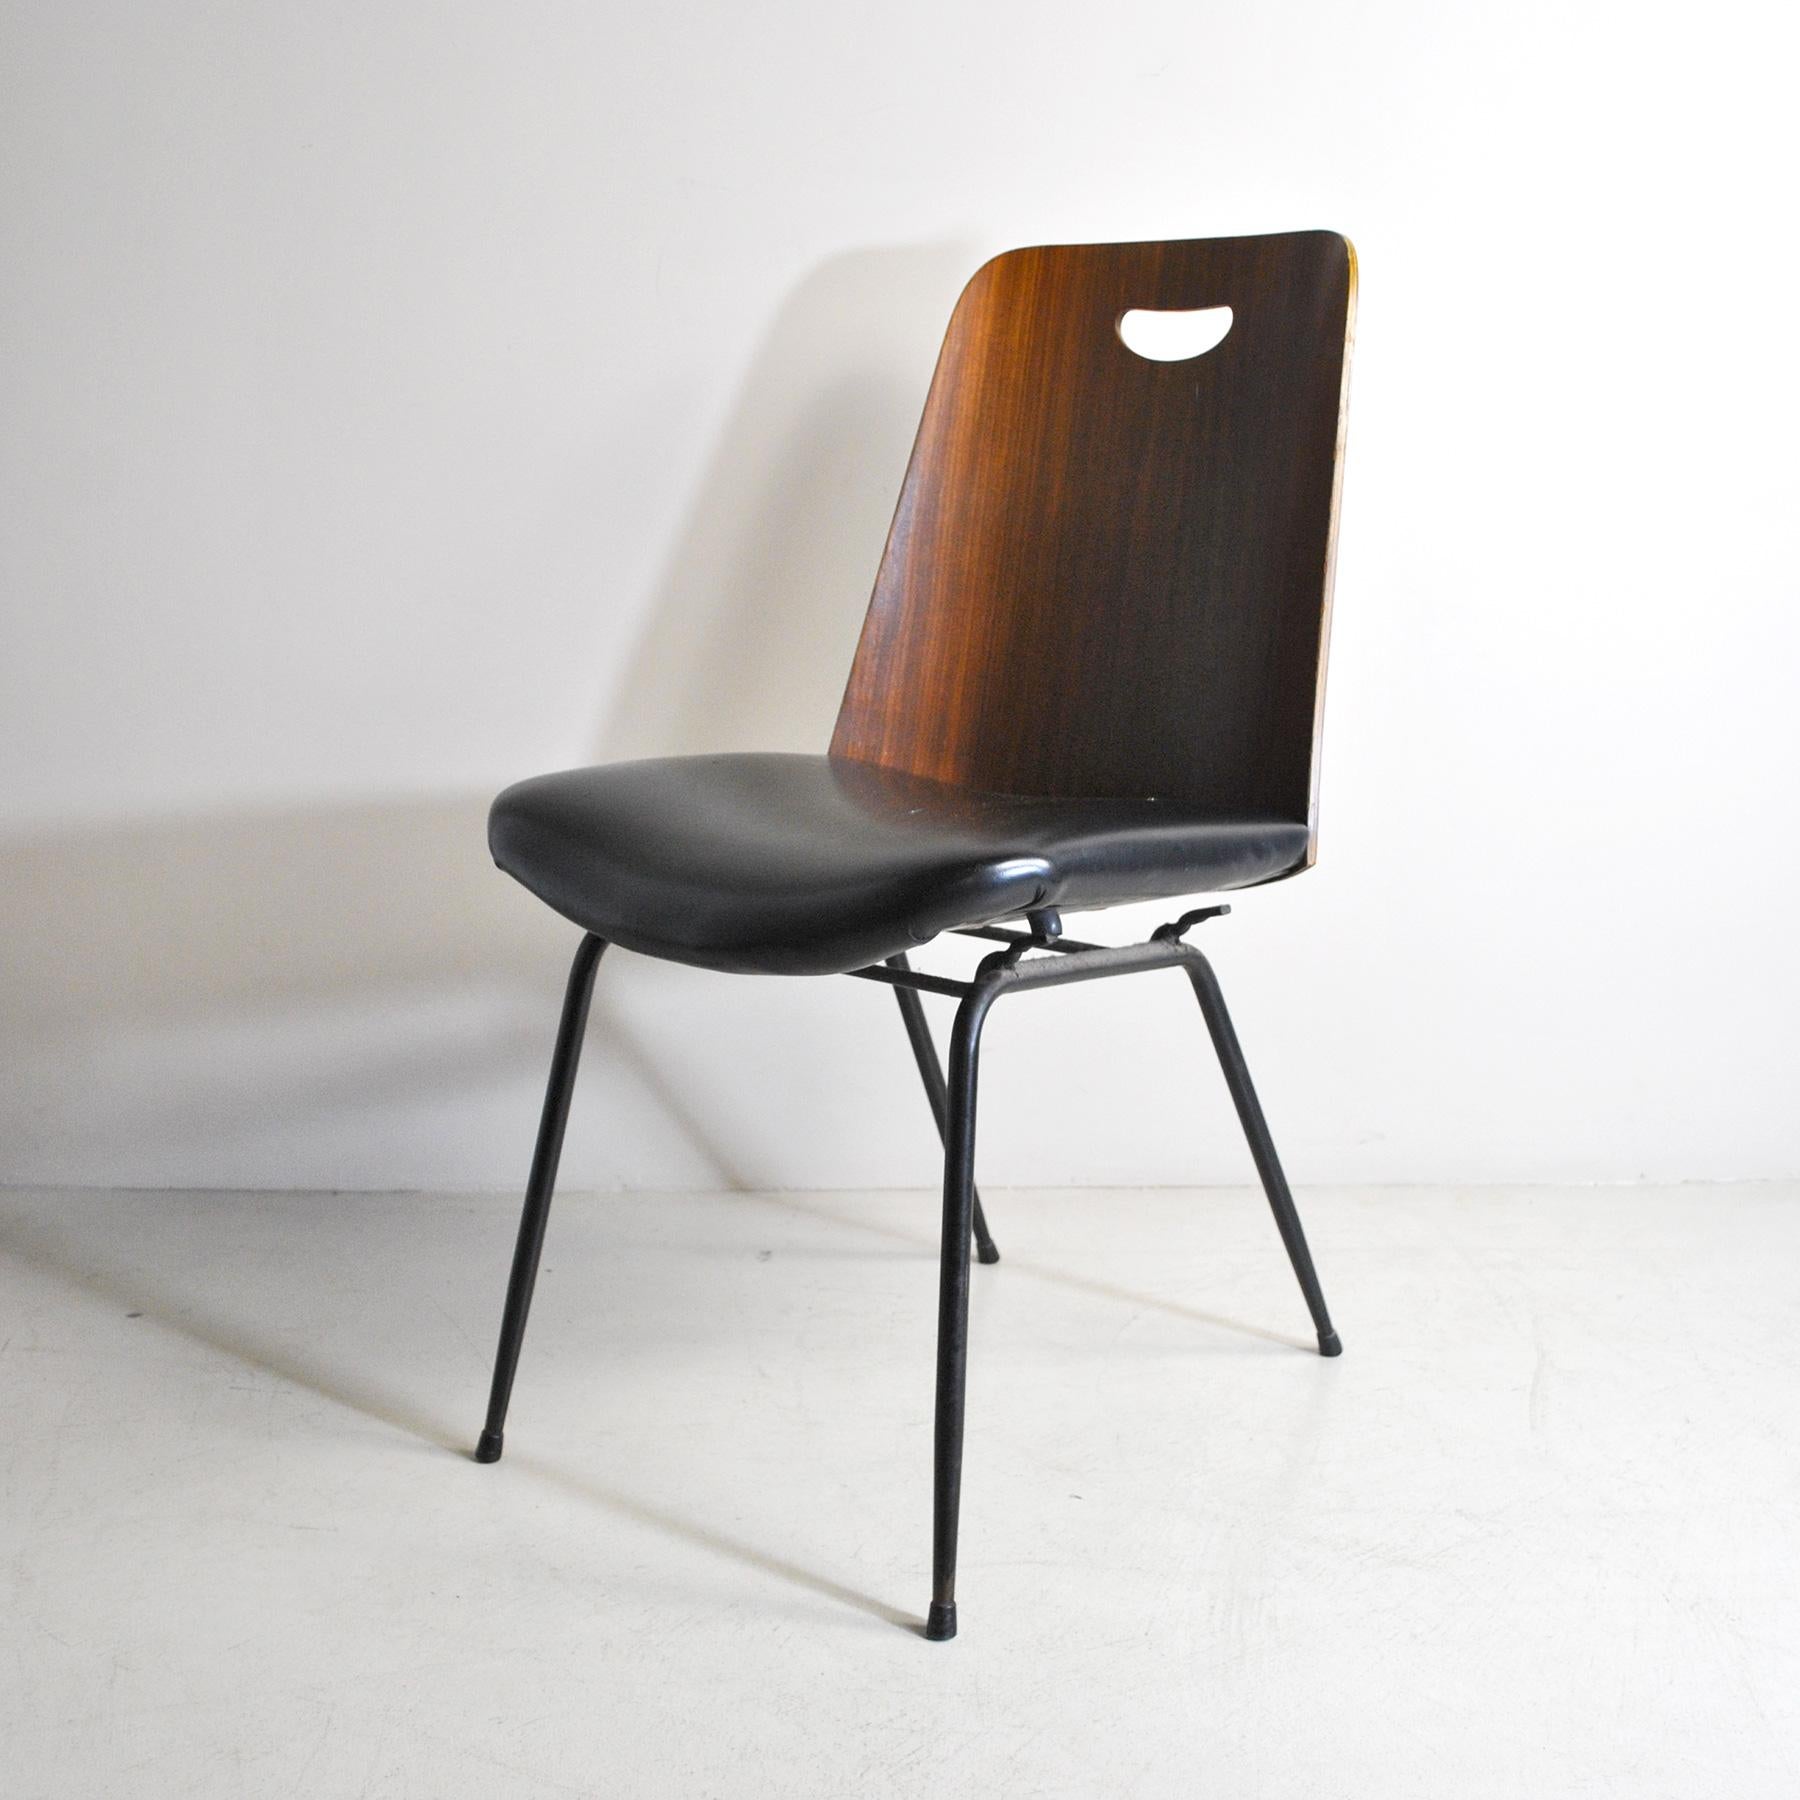 Single chair produced by Rima from the 1950s, model DU 22, designed by Gastone Rinaldi.